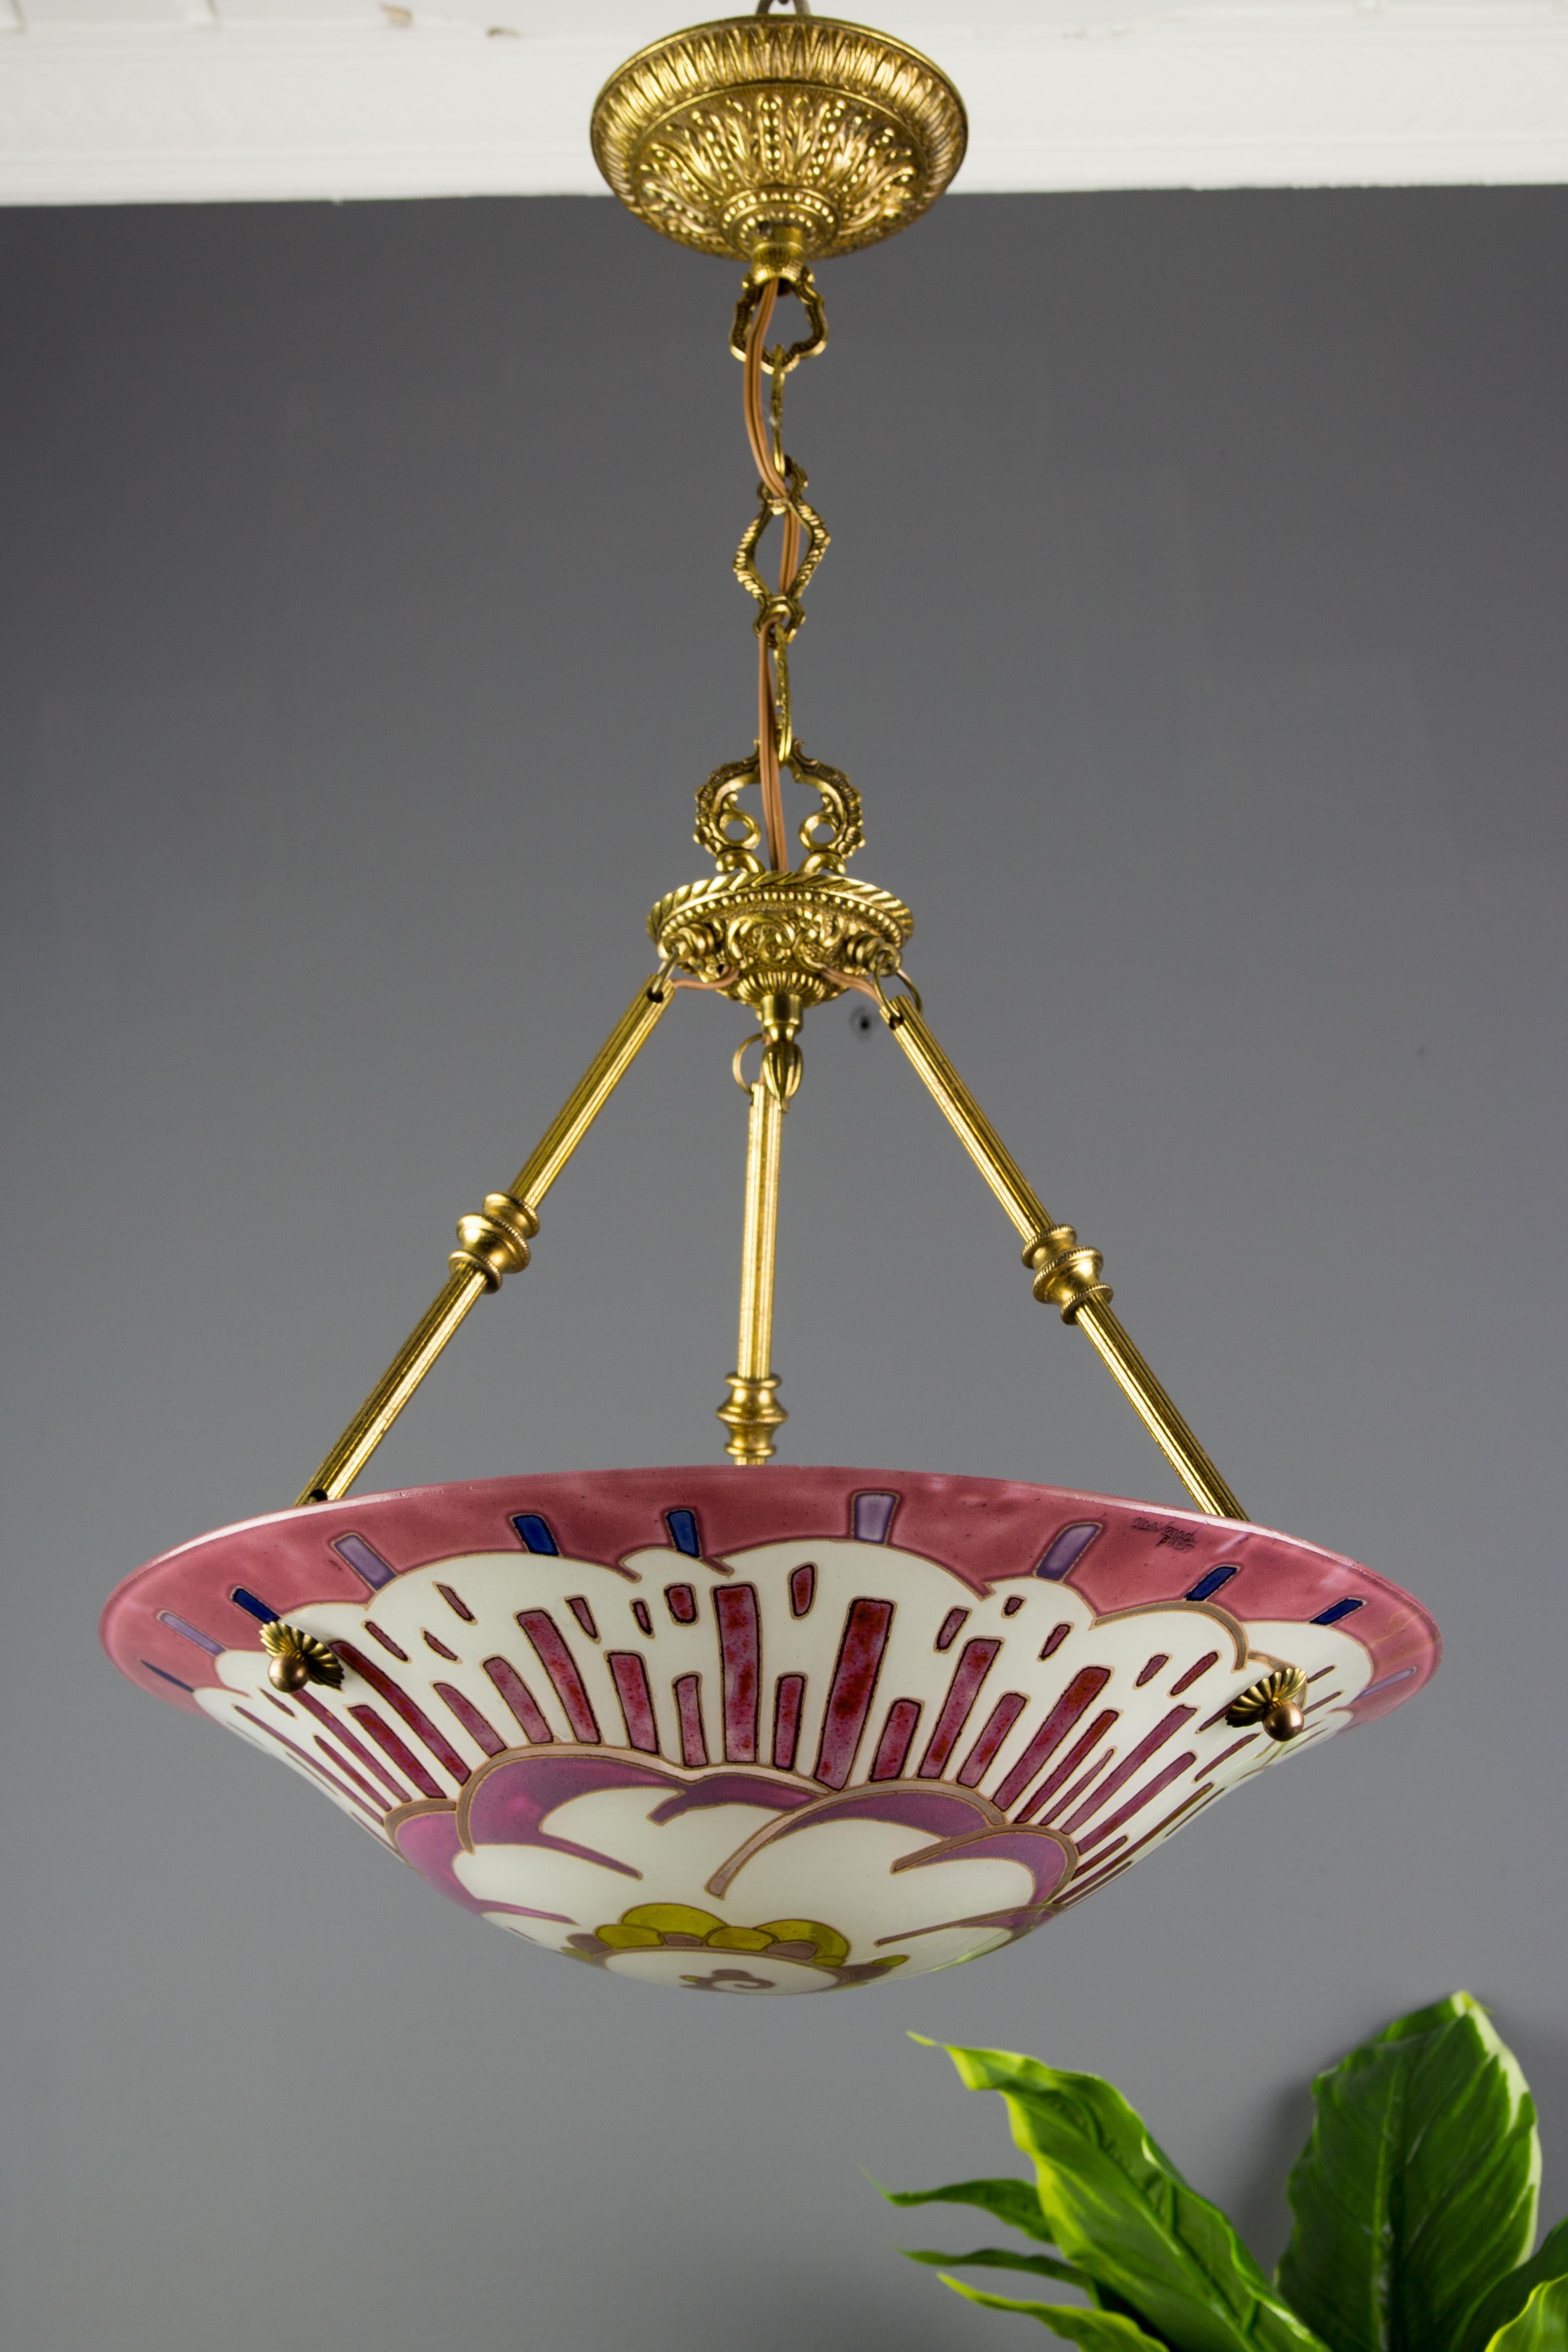 Mid-20th Century French Art Deco Enameled Glass Pendant Light Signed by Maxonade, Paris, 1930s